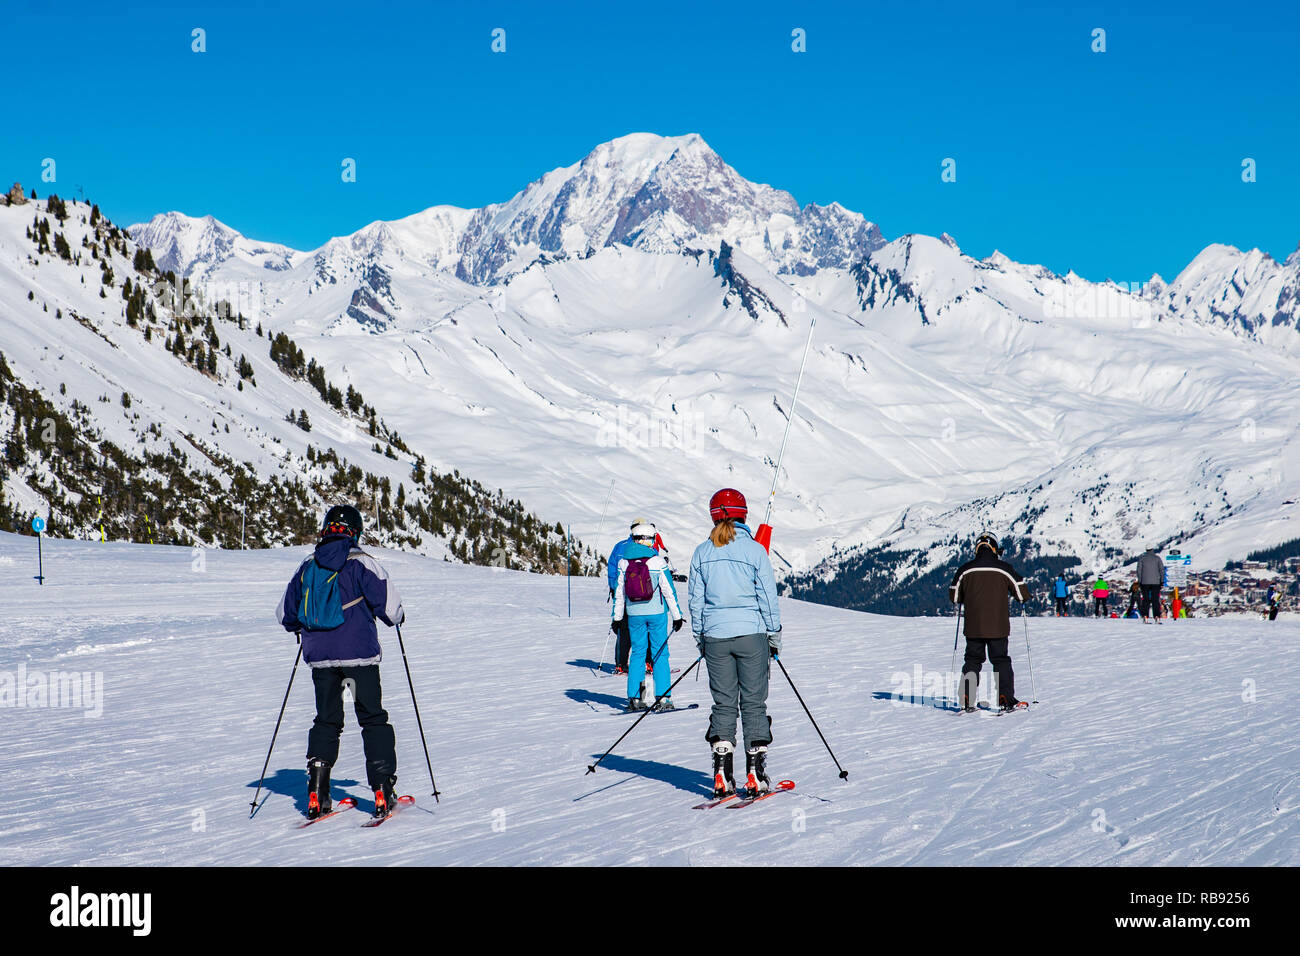 People enjoy ski and snowboard for winter holiday in Alps area with Mont Blanc as background, Les Arcs 2000, Savoie, France, Europe Stock Photo